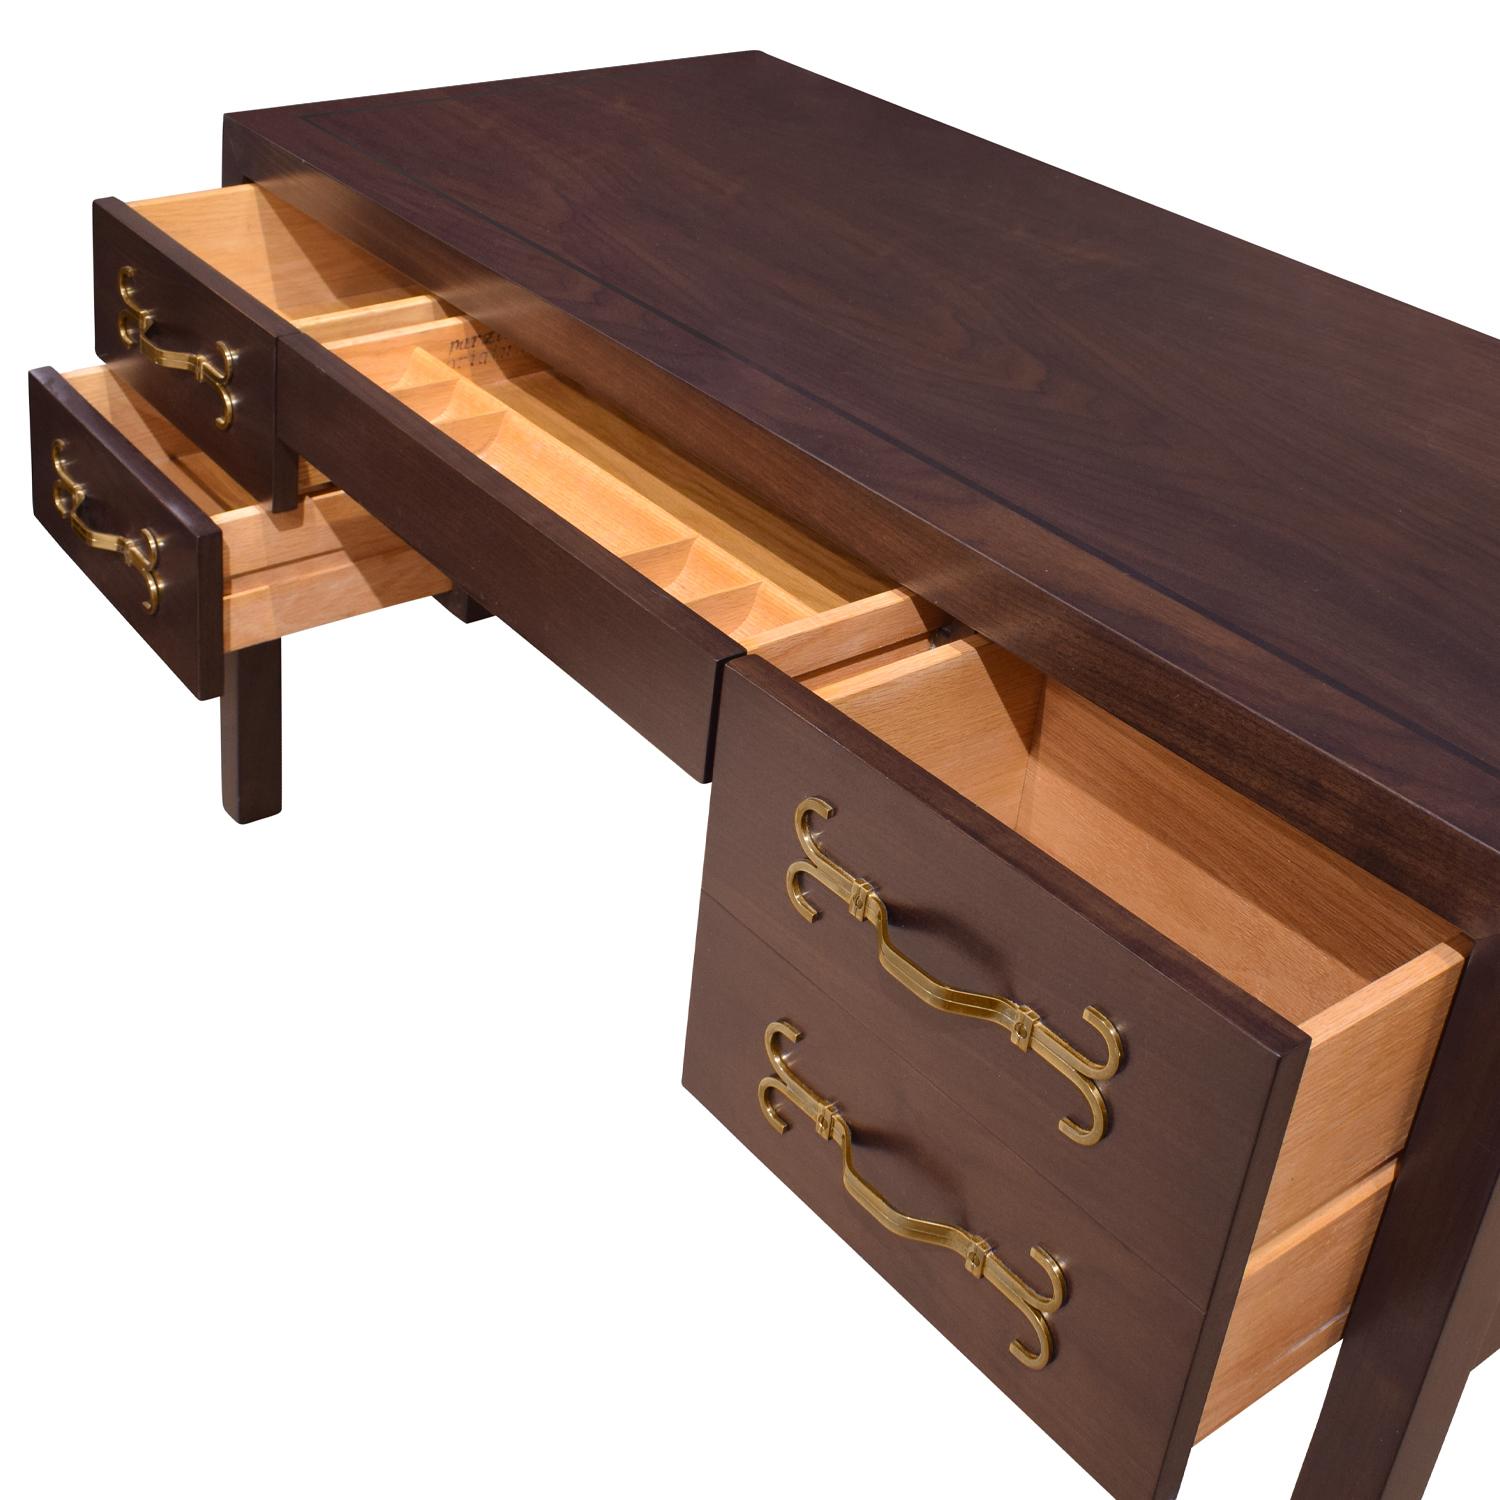 Mid-Century Modern Tommi Parzinger Superb Desk in Walnut with Etched Brass Hardware 1960s 'Signed' For Sale